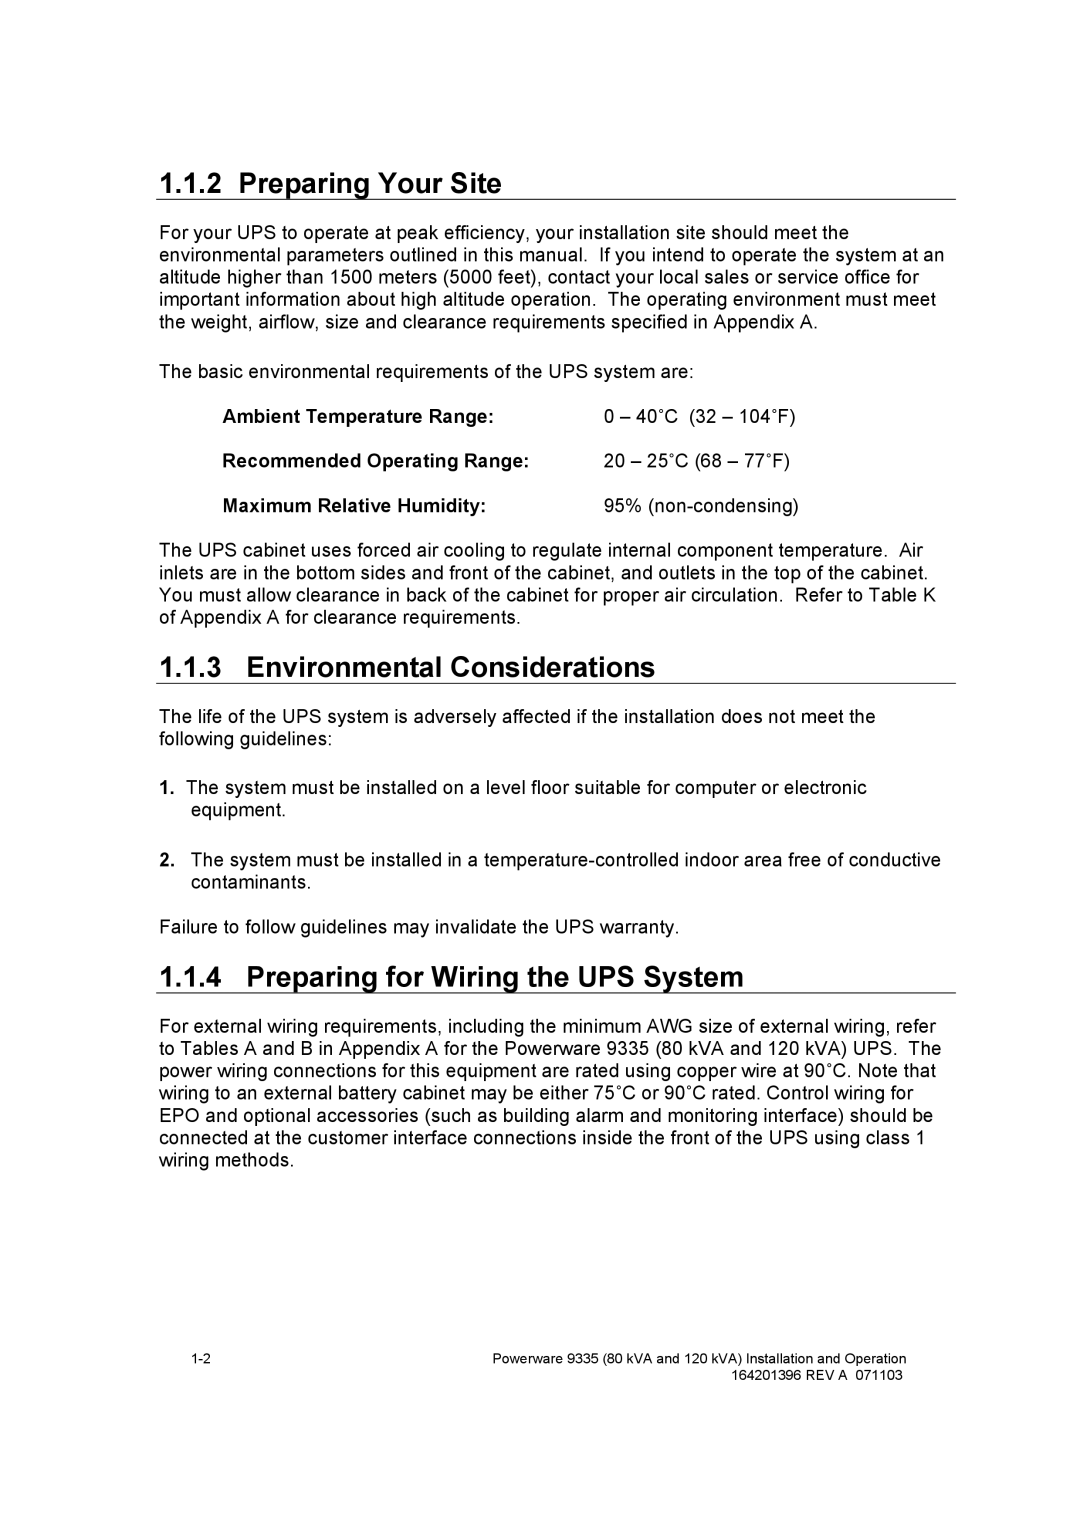 Powerware 9335 operation manual Preparing Your Site, Environmental Considerations, Preparing for Wiring the UPS System 